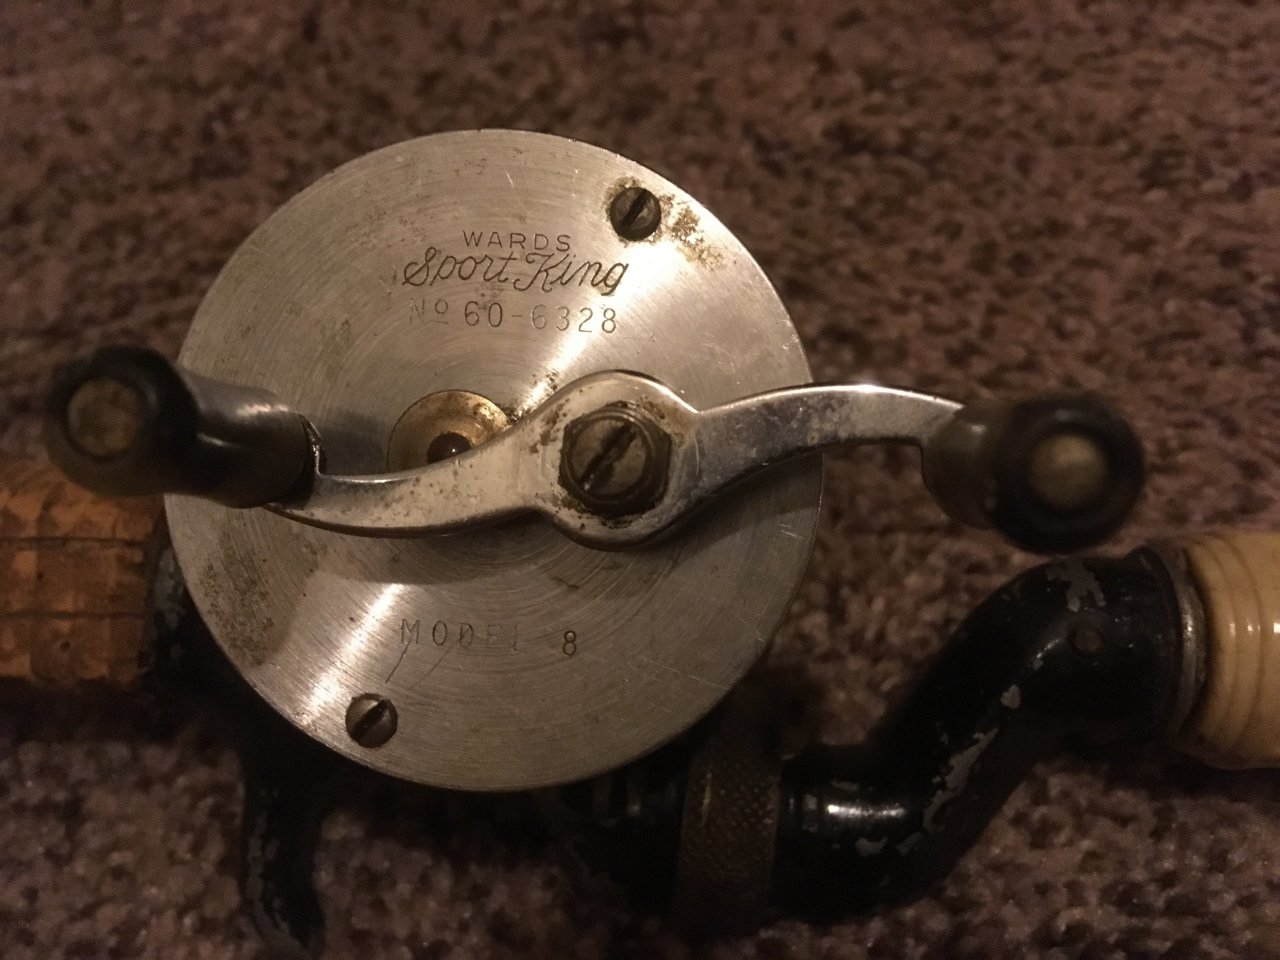 What Year Was A Wards Sport King No 60-6328 Model 8 Fishing Reel Made ...